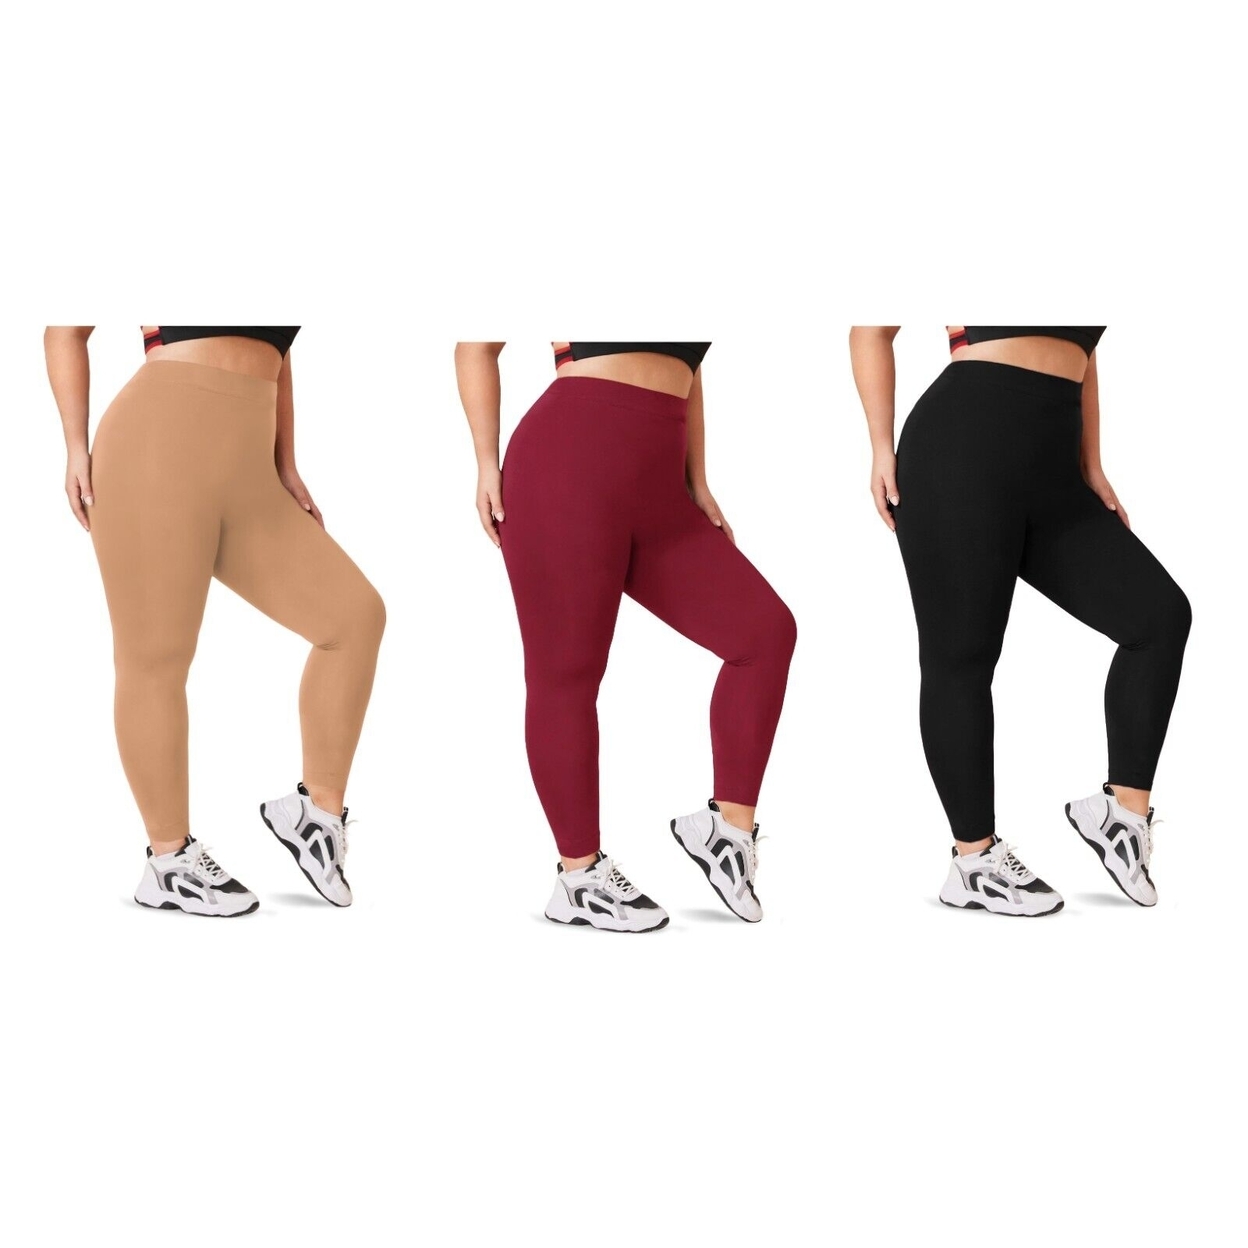 Multi-Pack: Women's Casual Ultra-Soft Smooth High Waisted Athletic Active Yoga Leggings Plus Size Available - 1-pack, 2x